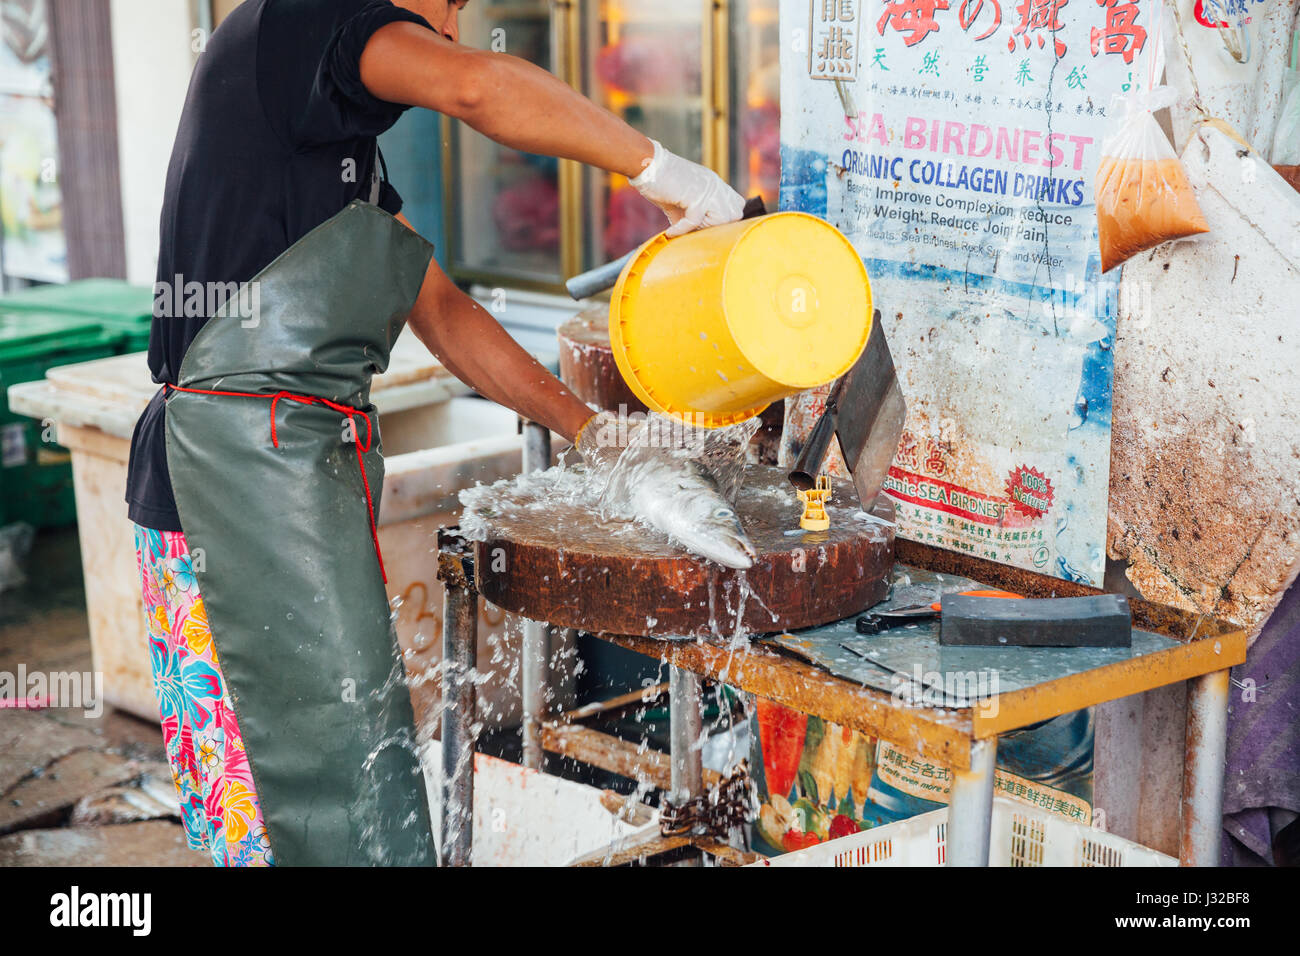 GEORGE TOWN, MALAYSIA - MARCH 23: Man prepare the fish for sale at the wet market on March 23, 2016 in George Town, Malaysia. Stock Photo